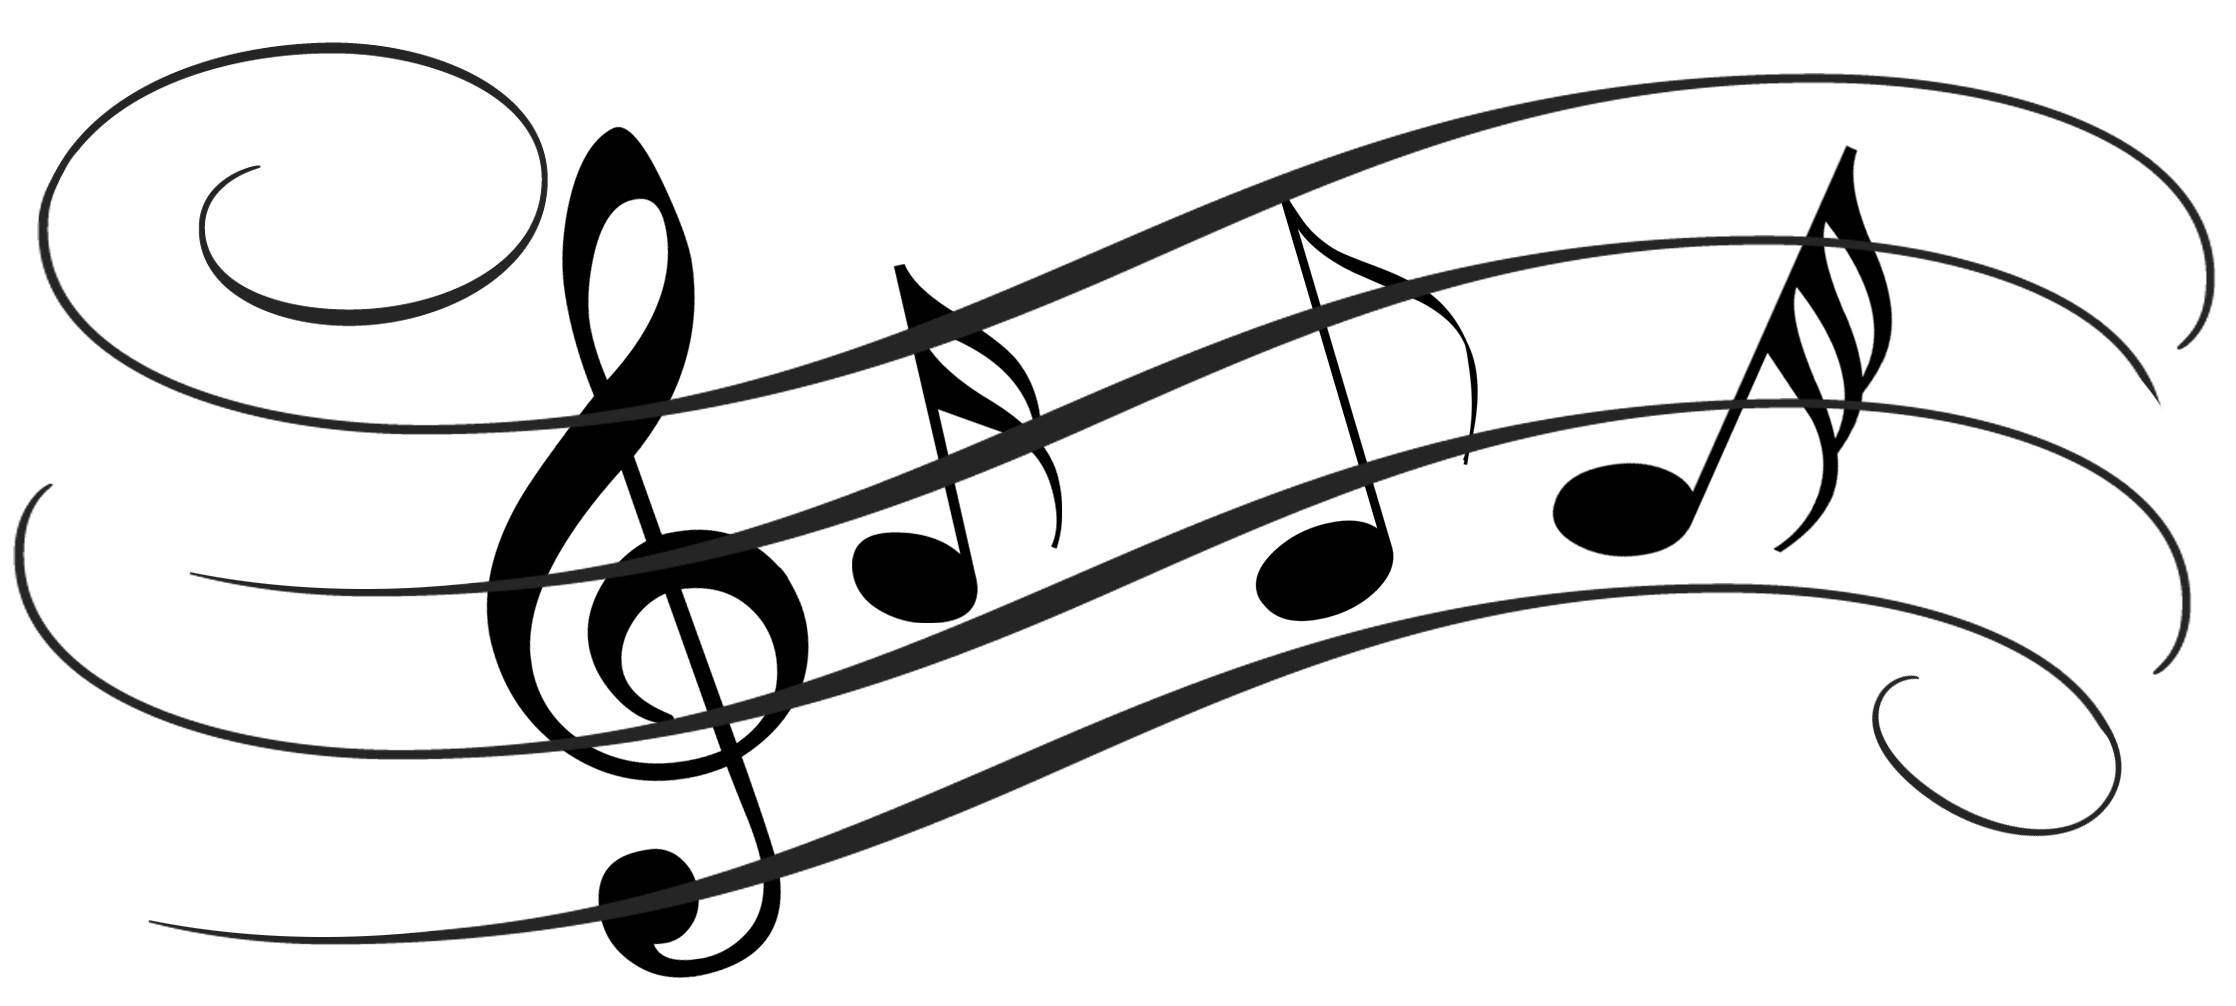 1000+ images about music notes | Music notes, Music ...